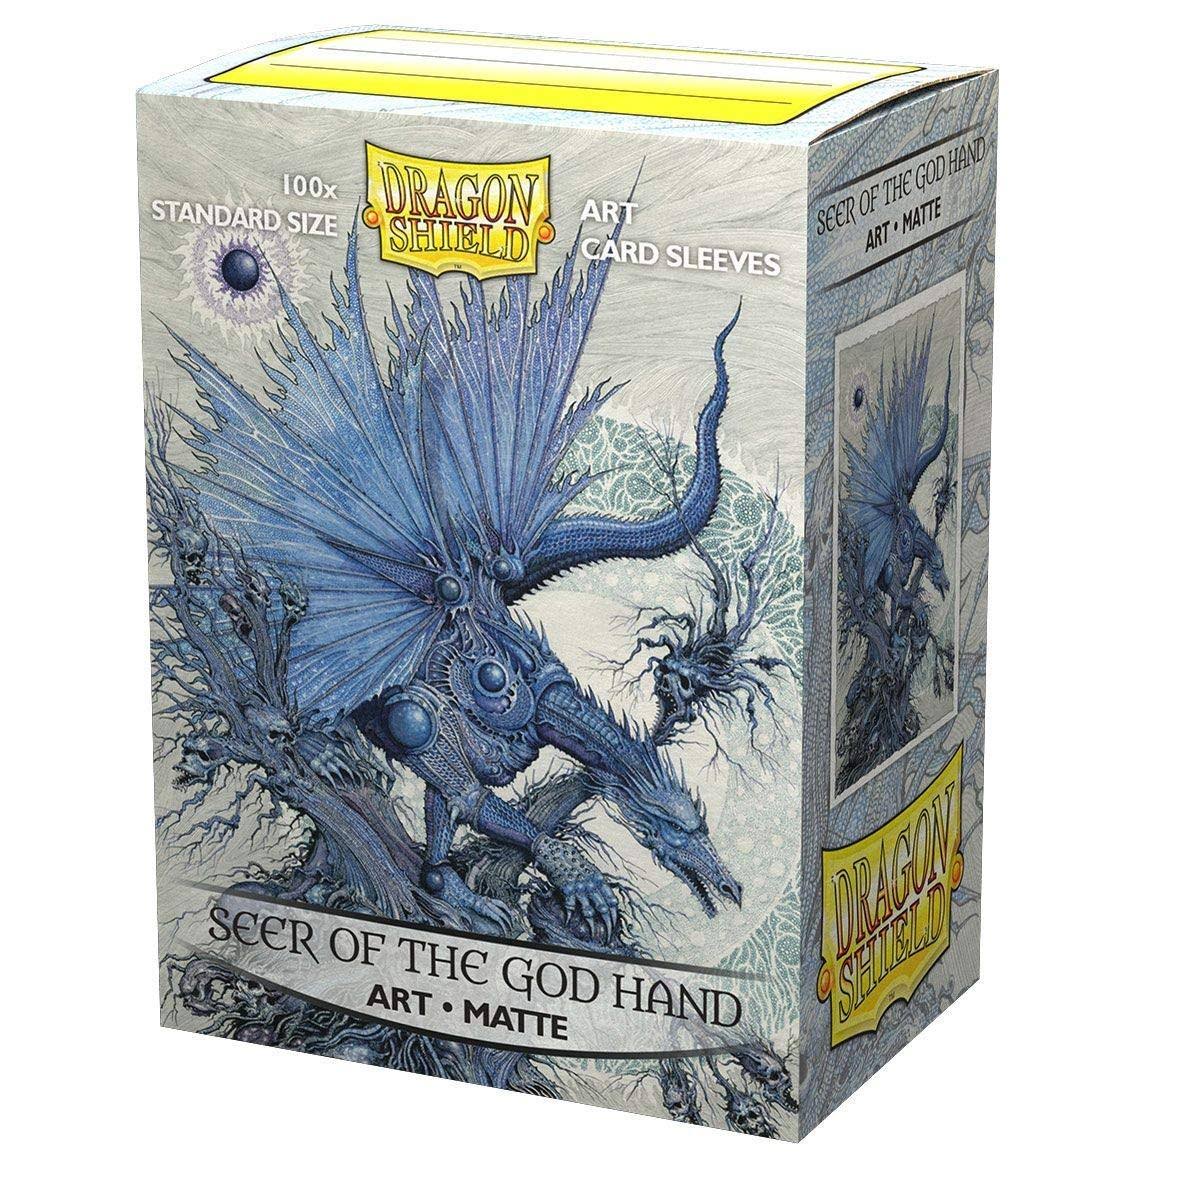 Dragon Shield - Seer Of The God Hand Matte Classic Art Sleeves - 100 Sleeves